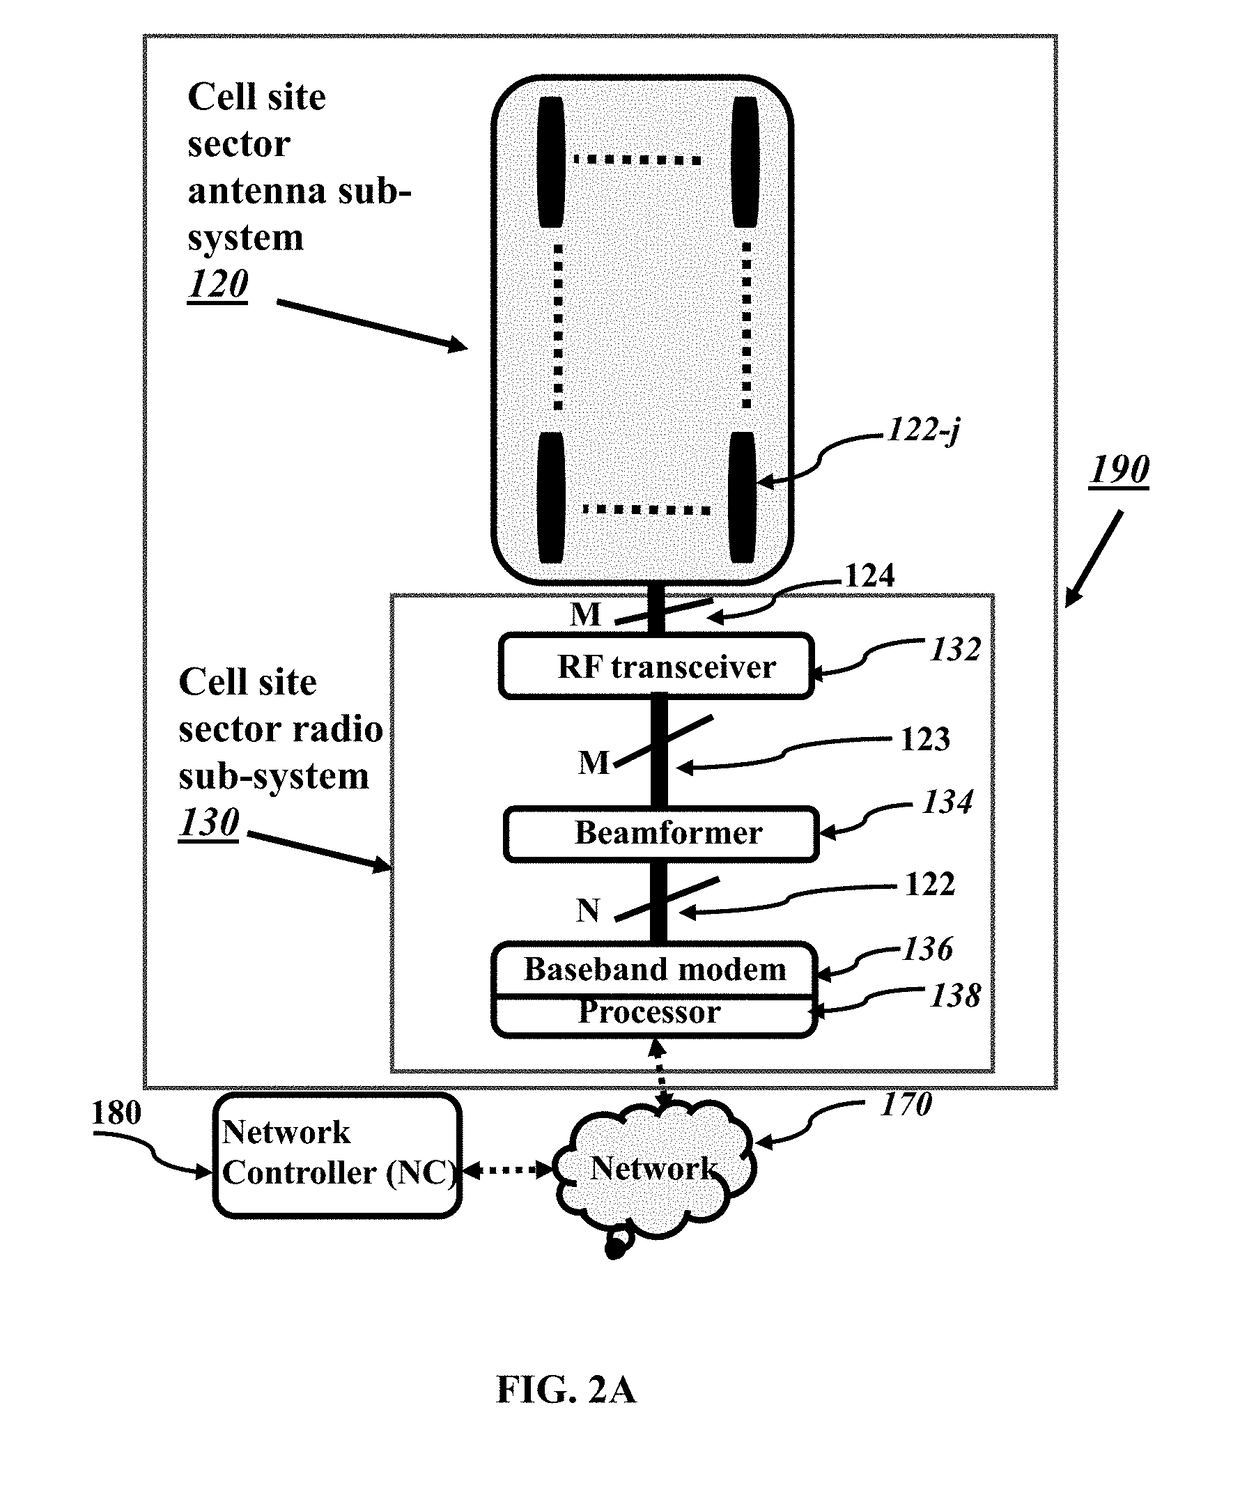 Wireless communications system for broadband access to aerial platfroms